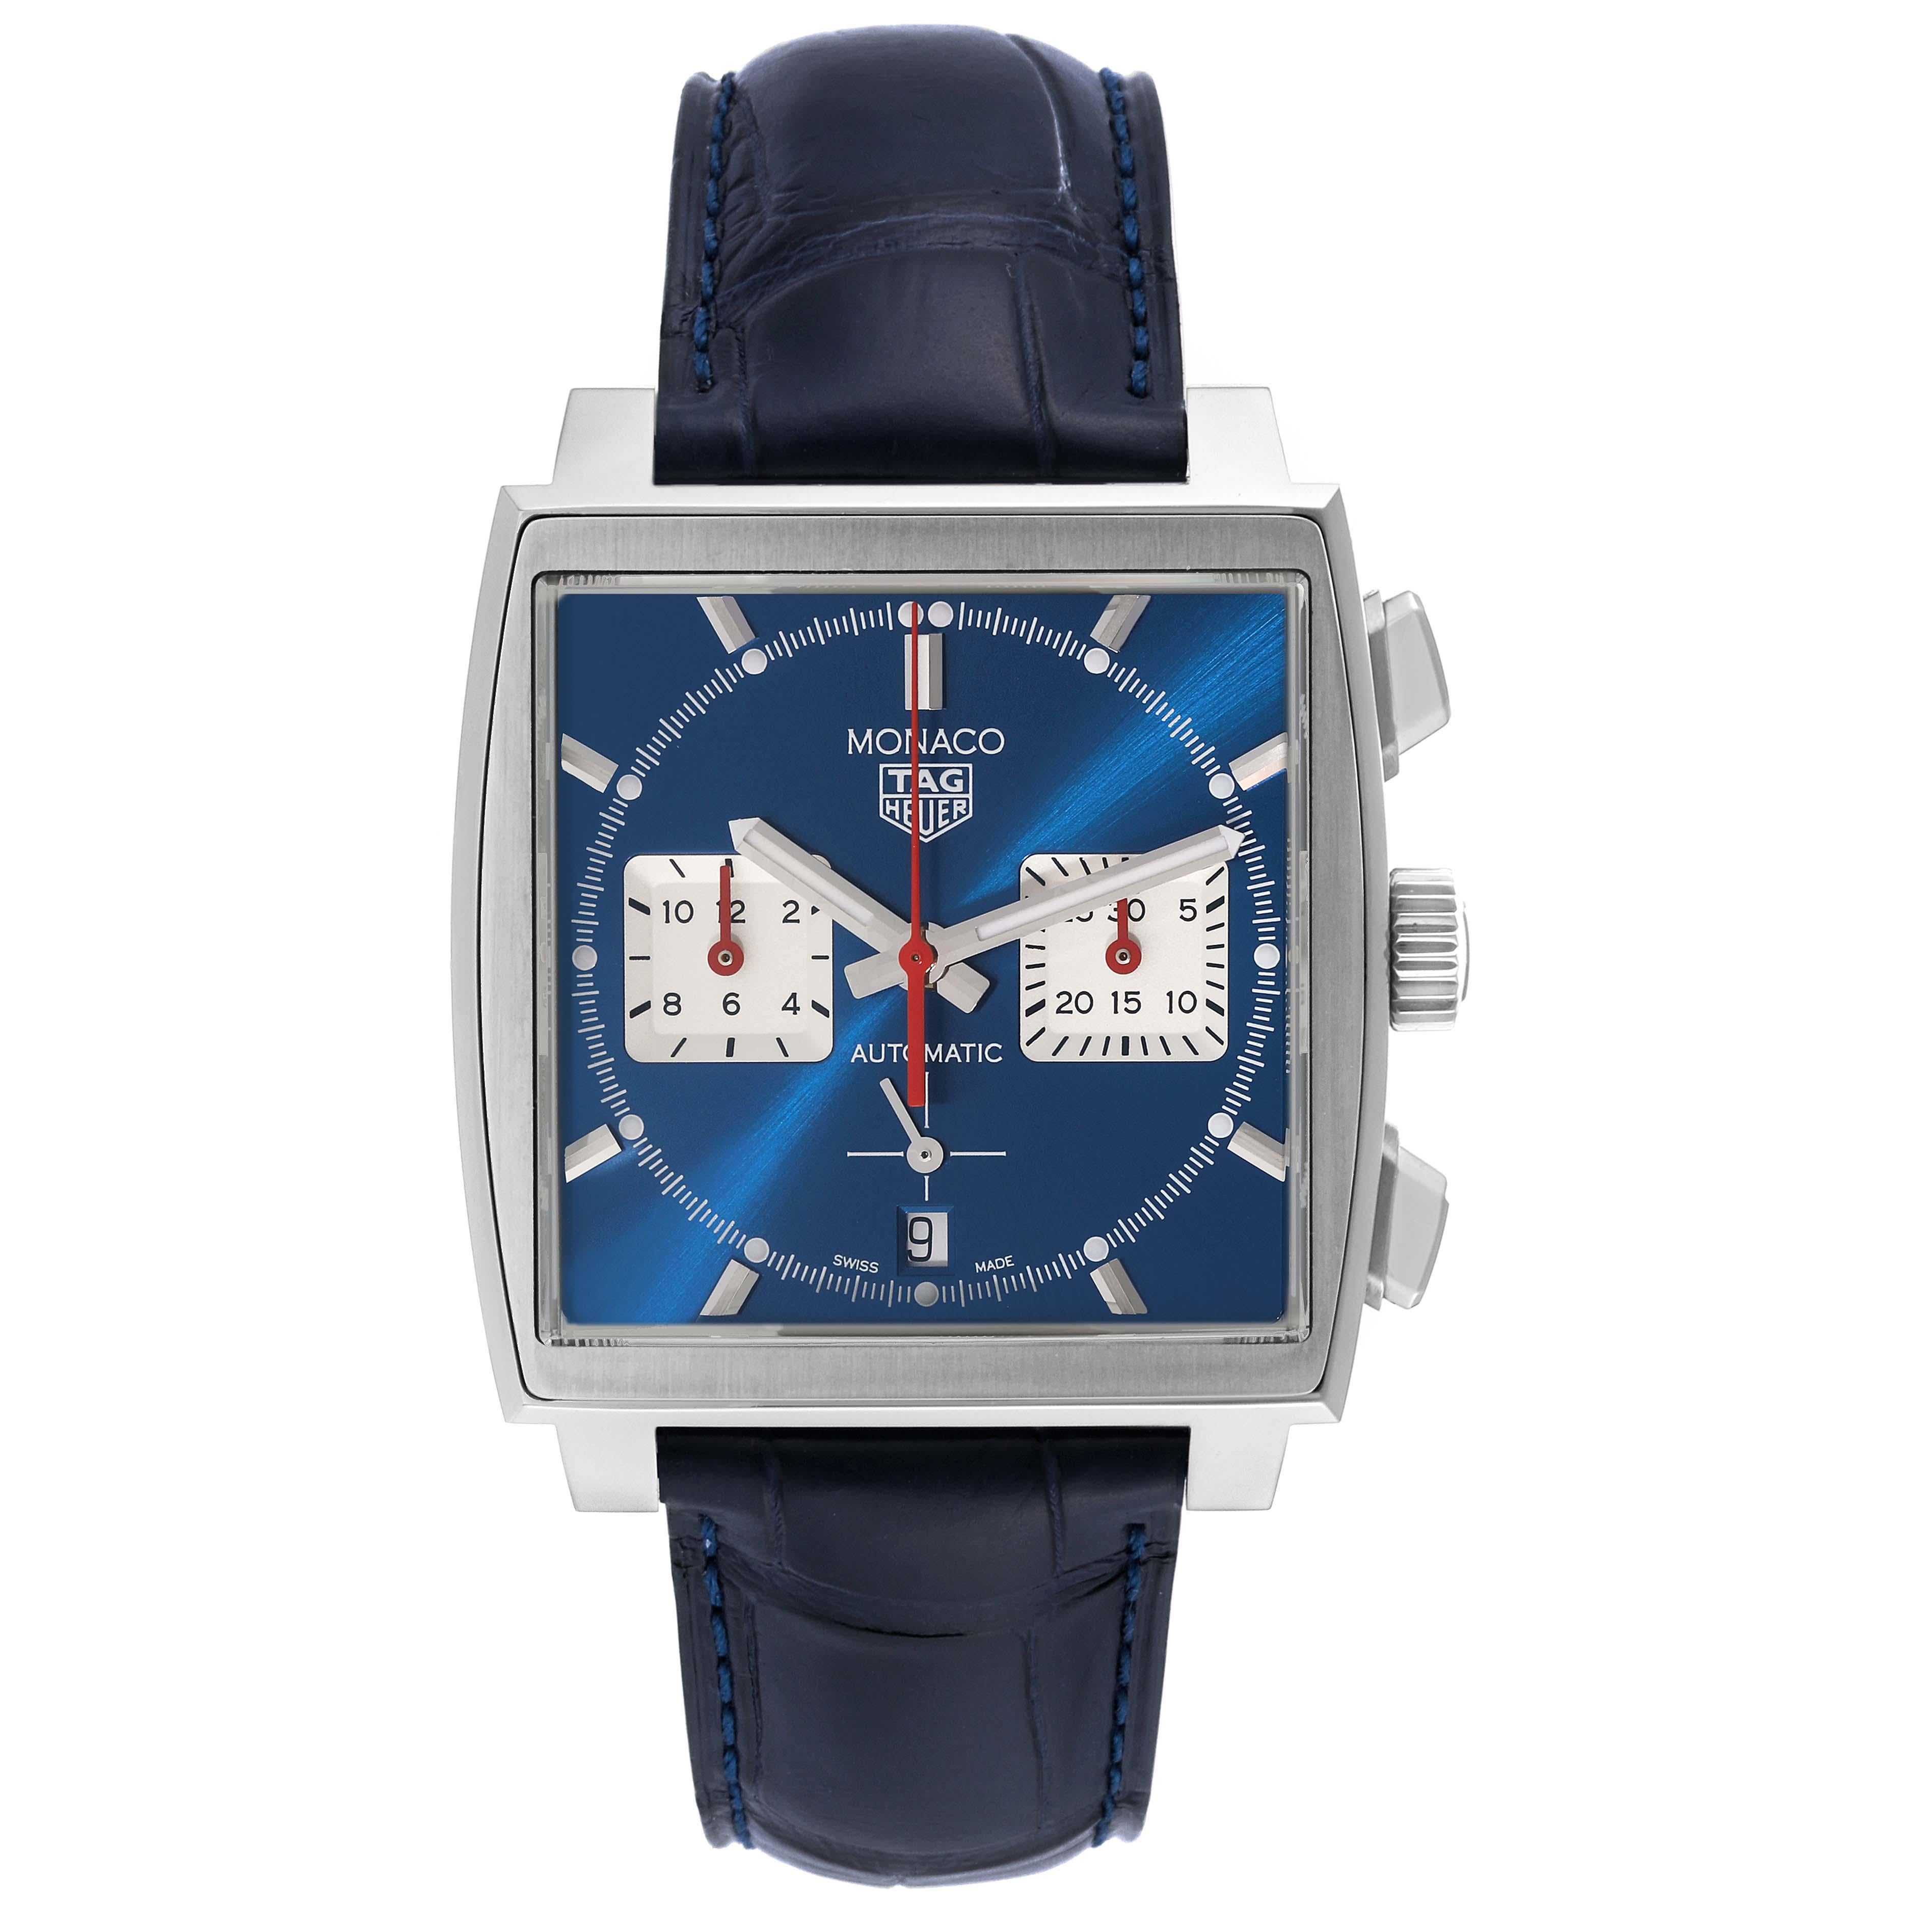 Tag Heuer Monaco Calibre 02 Blue Dial Steel Mens Watch CBL2111 Box Card. Automatic self-winding movement. Alternate fine-brushed and polished stainless steel case 39.0 x 39.0 mm. Fluted crown. Transparent exhibtion sapphire crystal caseback.